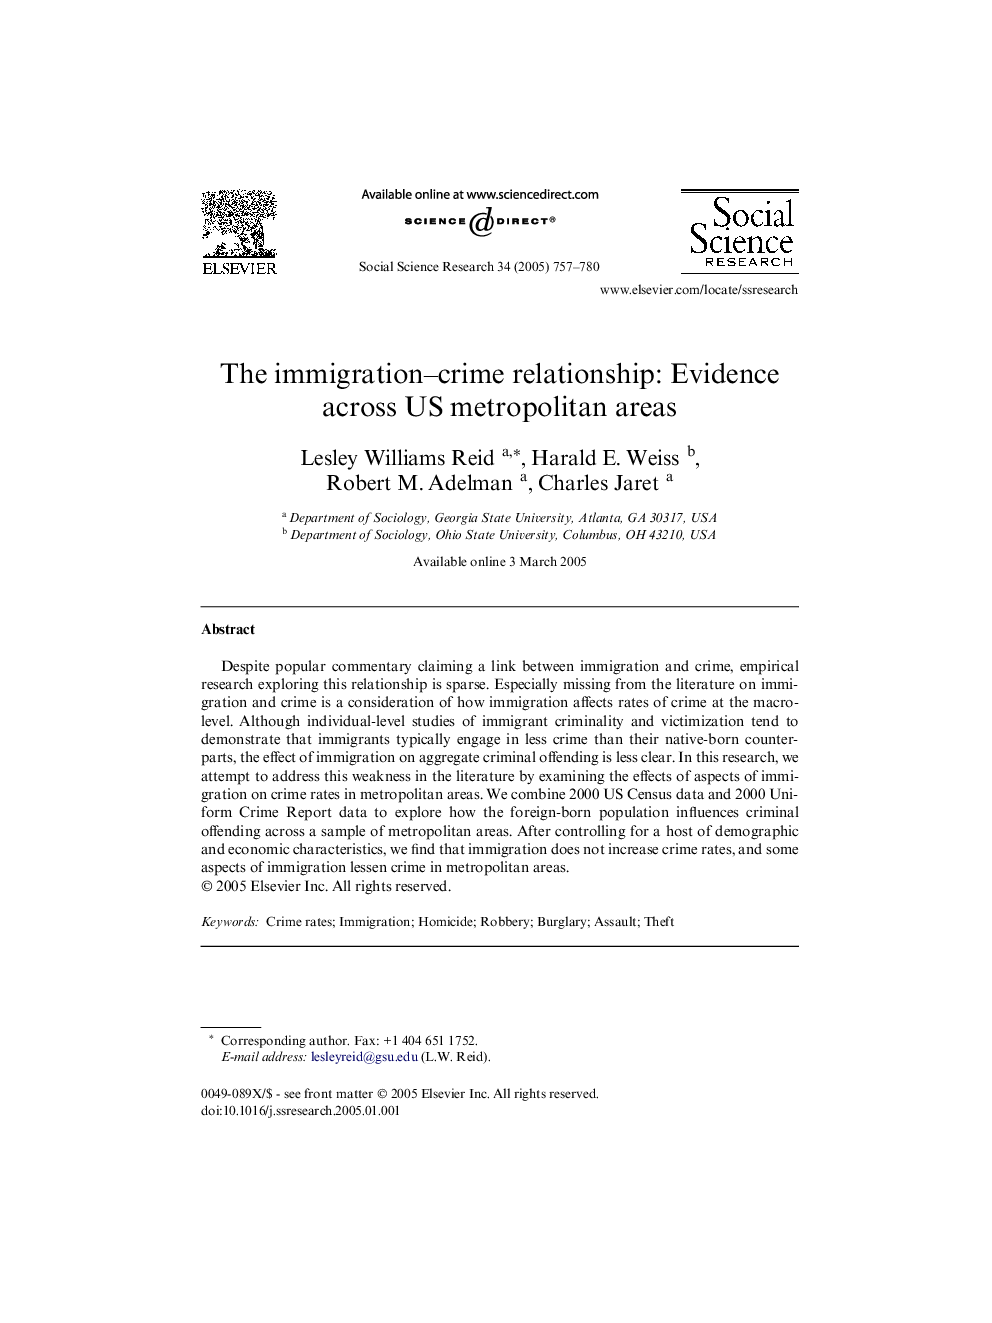 The immigration-crime relationship: Evidence across US metropolitan areas